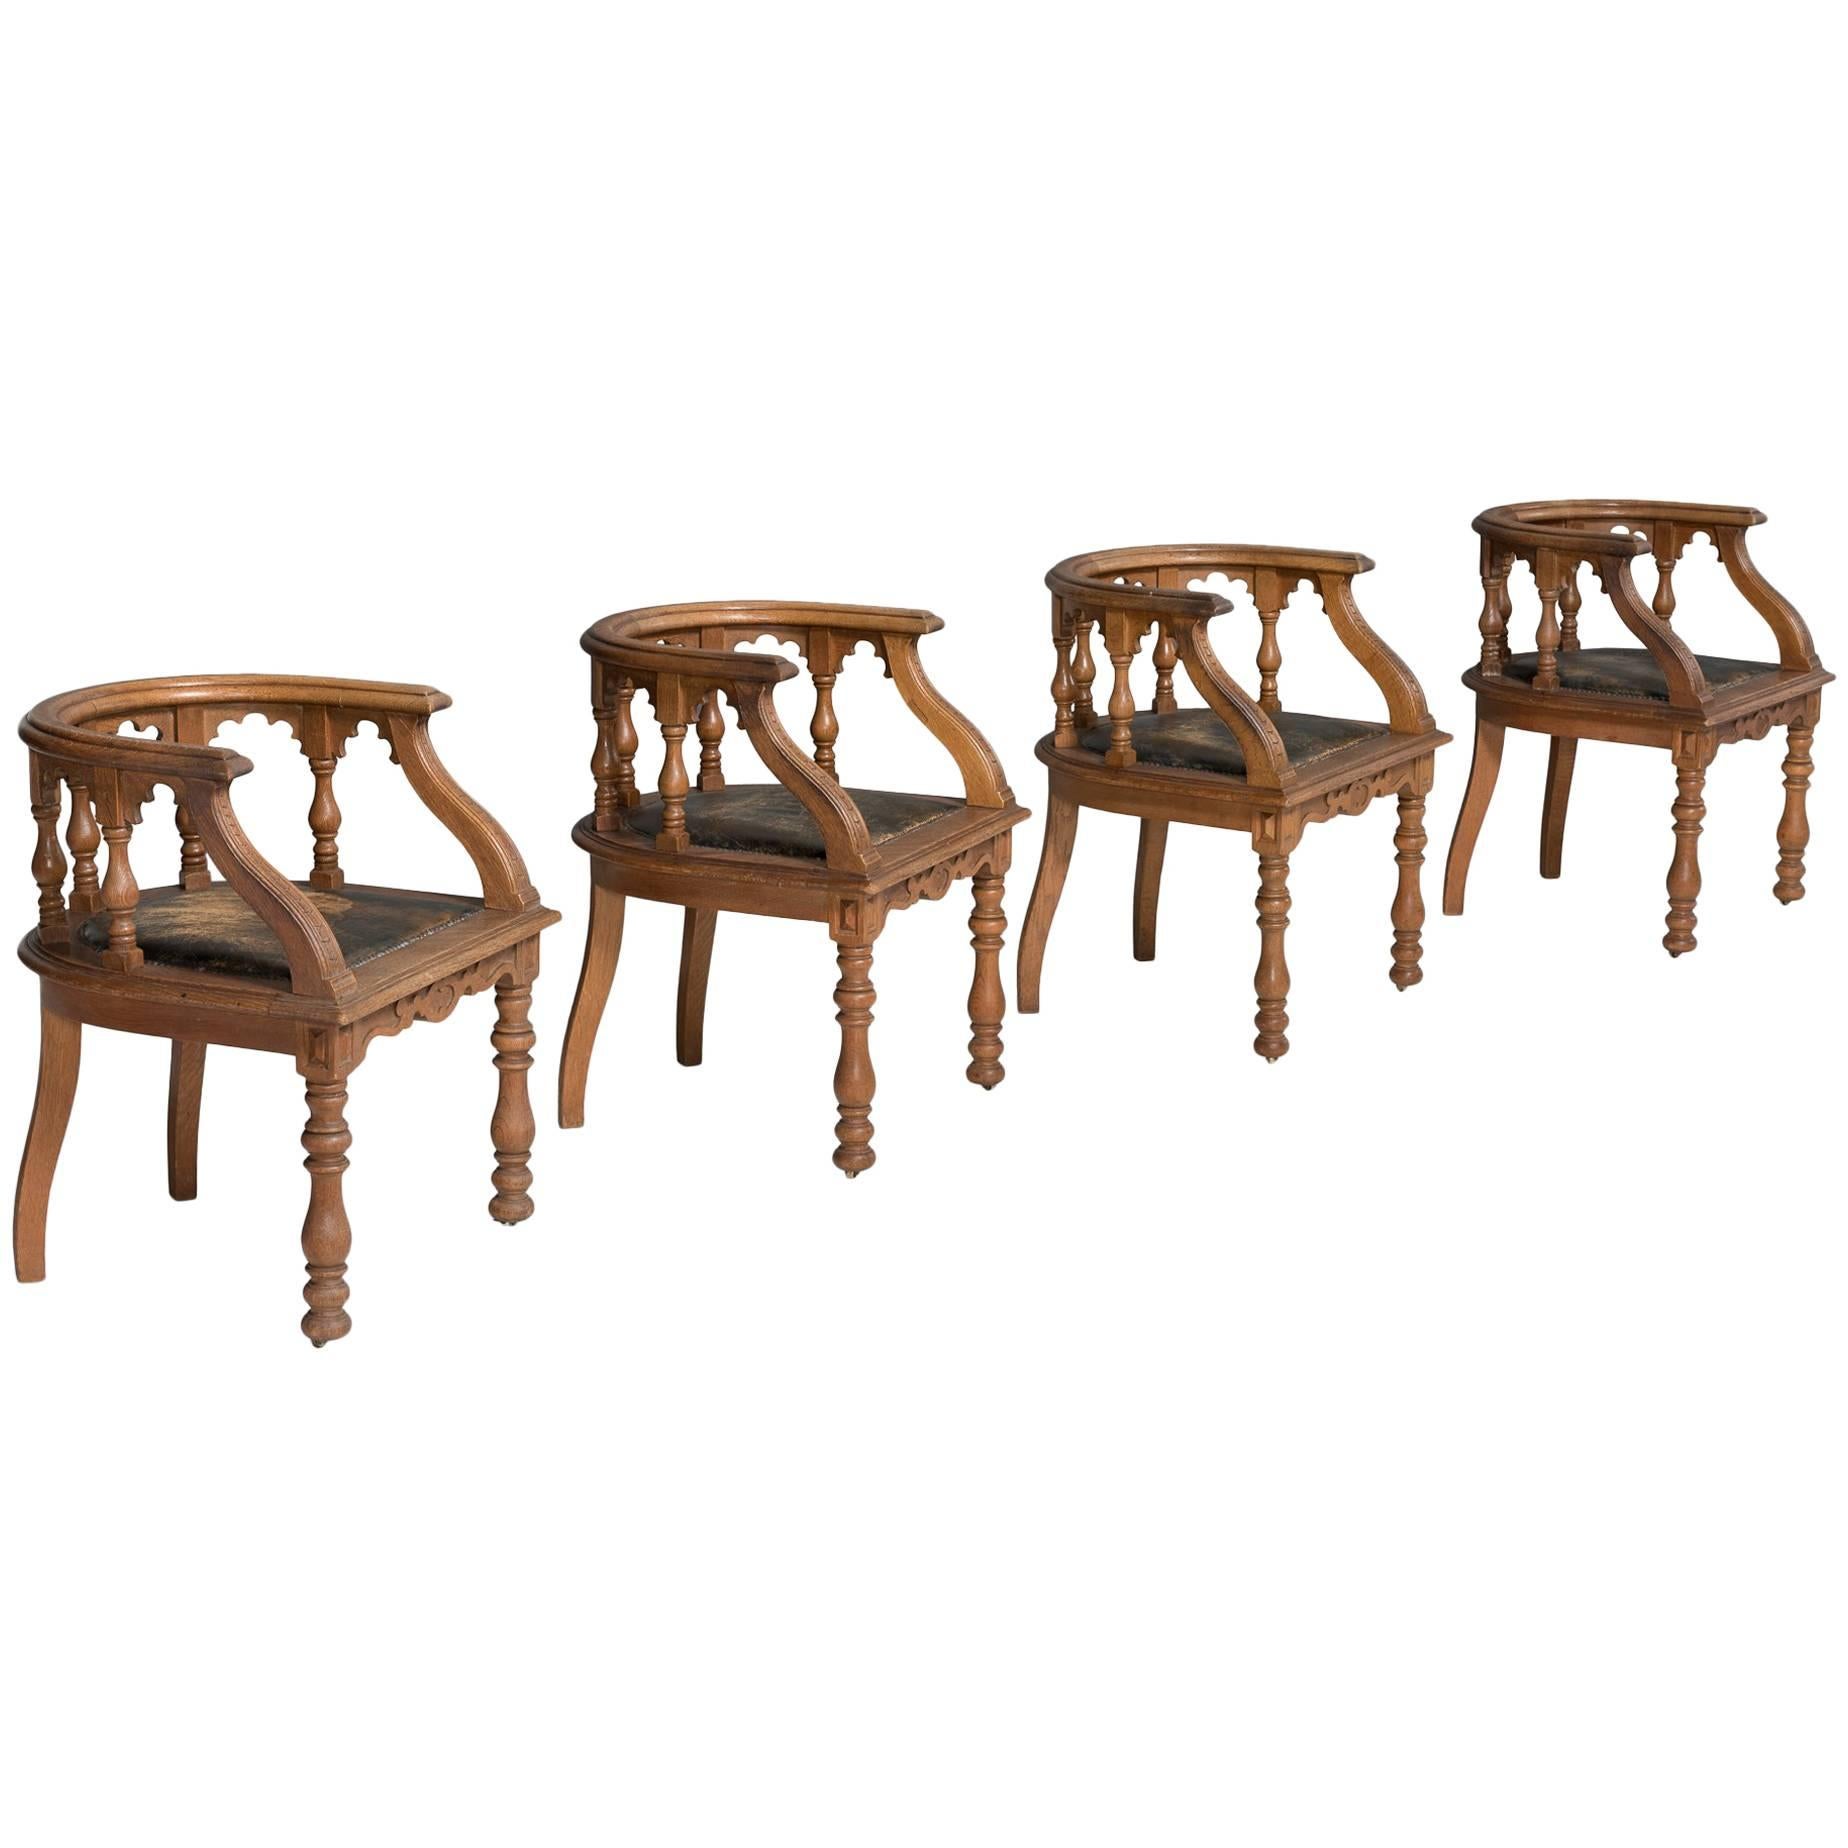 Taylor of Edinburgh oak armchair, Scotland, circa 1890.

Carved oak chairs with original leather upholstery, and inset brass castors. Made by John Taylor & Sons of Edinburgh.

Measures: 25